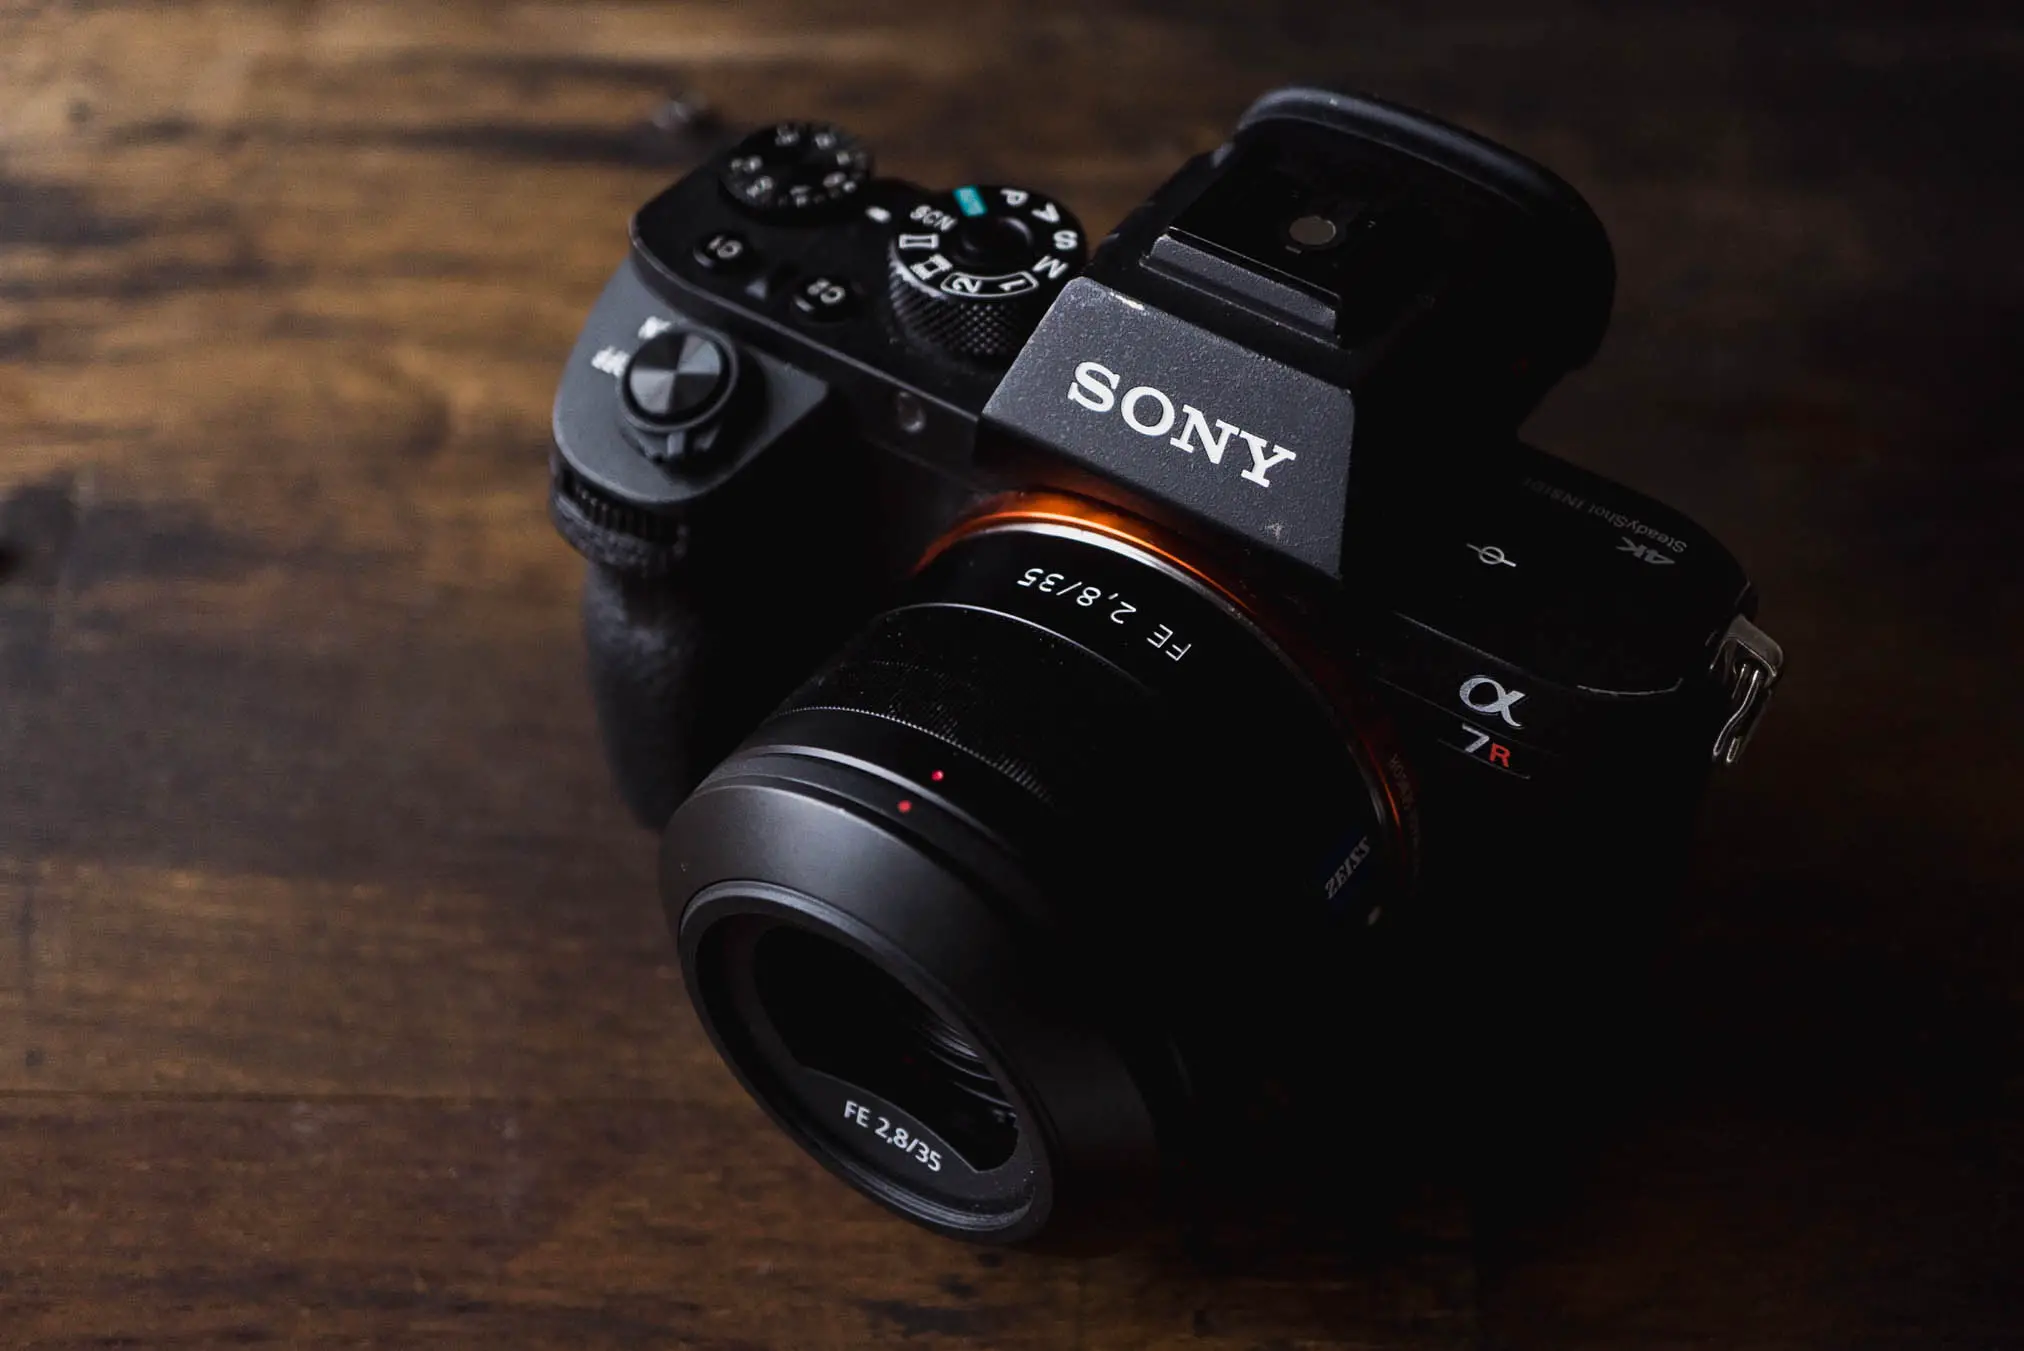 Canon User Shoots on Sony! Sony A7II Review - Street Photography Presets  for Adobe Lightroom CC